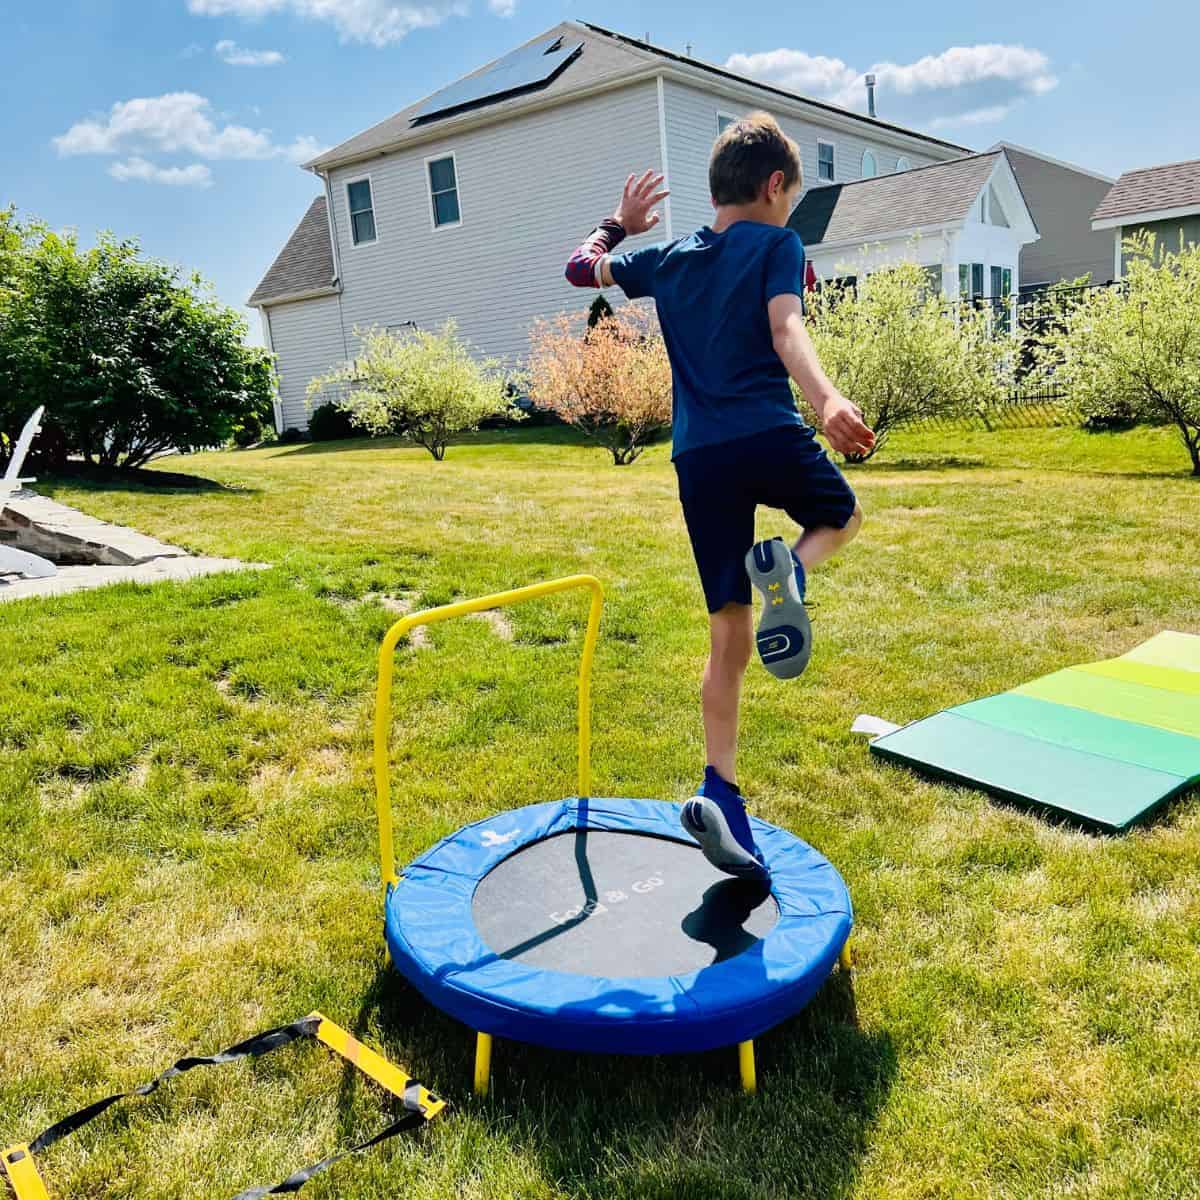 Obstacle course ideas for all ages, indoors or outdoors with little to no prep. Plus learn obstacle course benefits and get a list of activities to make your own! 